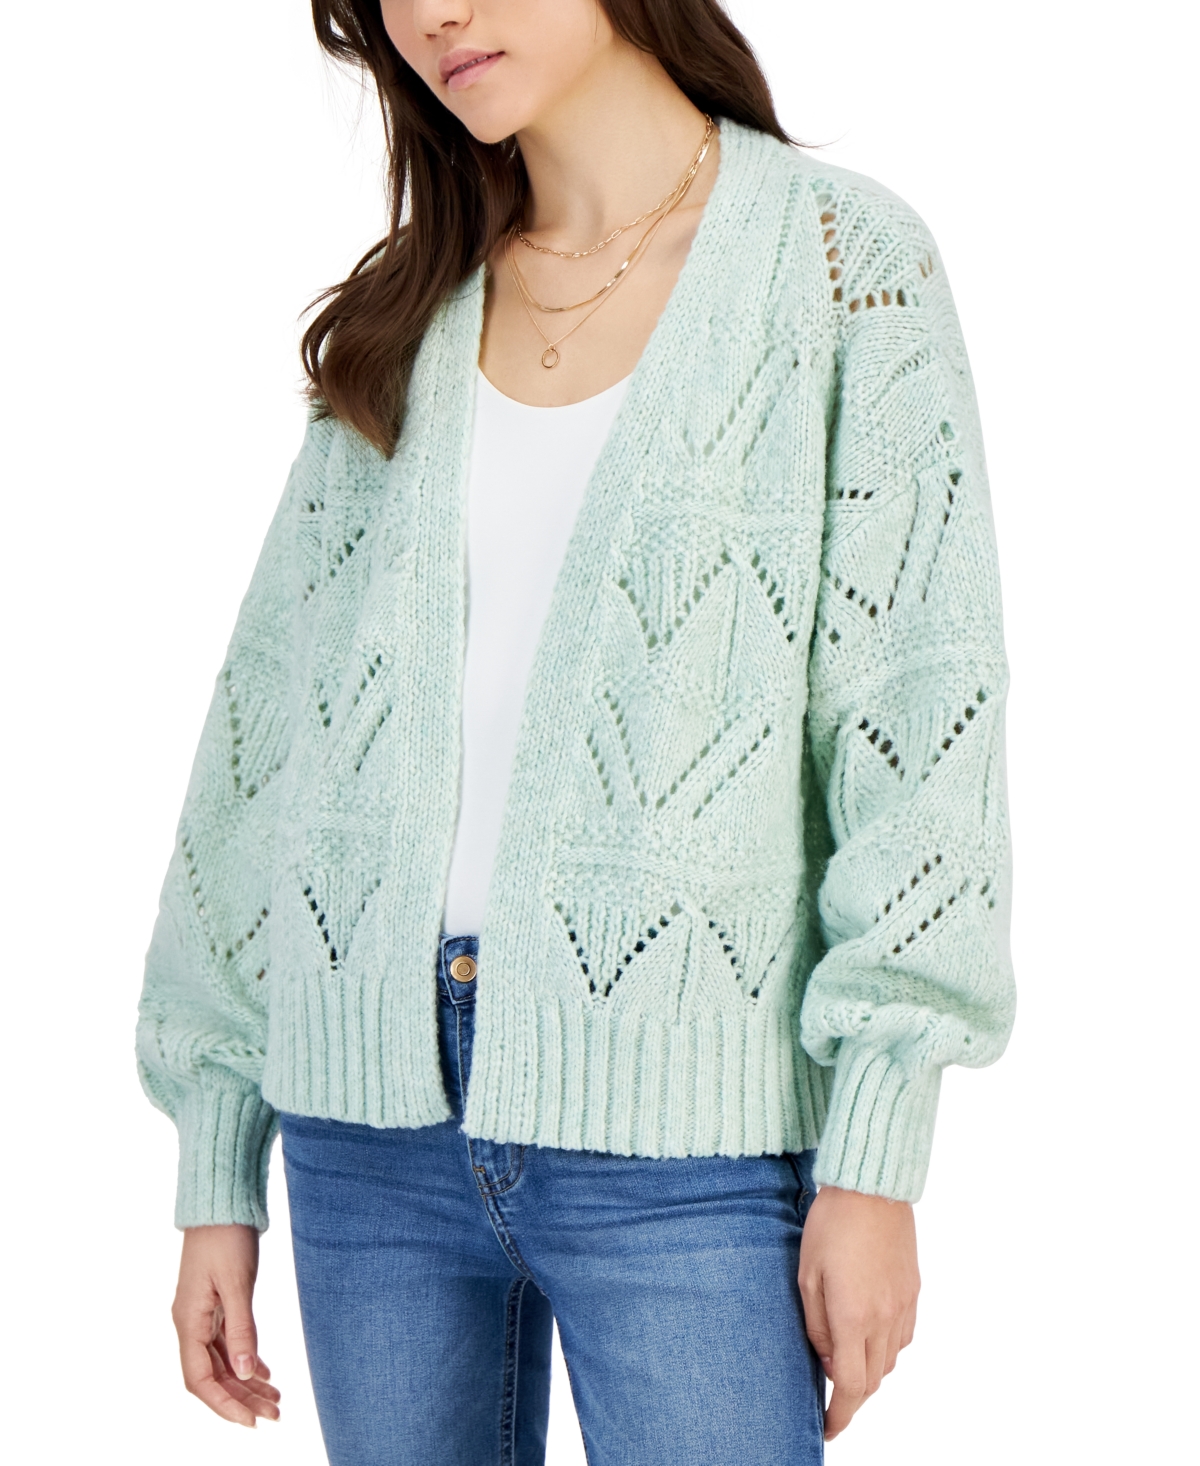 Juniors' Knit Open-Front Cardigan Sweater - White Sand